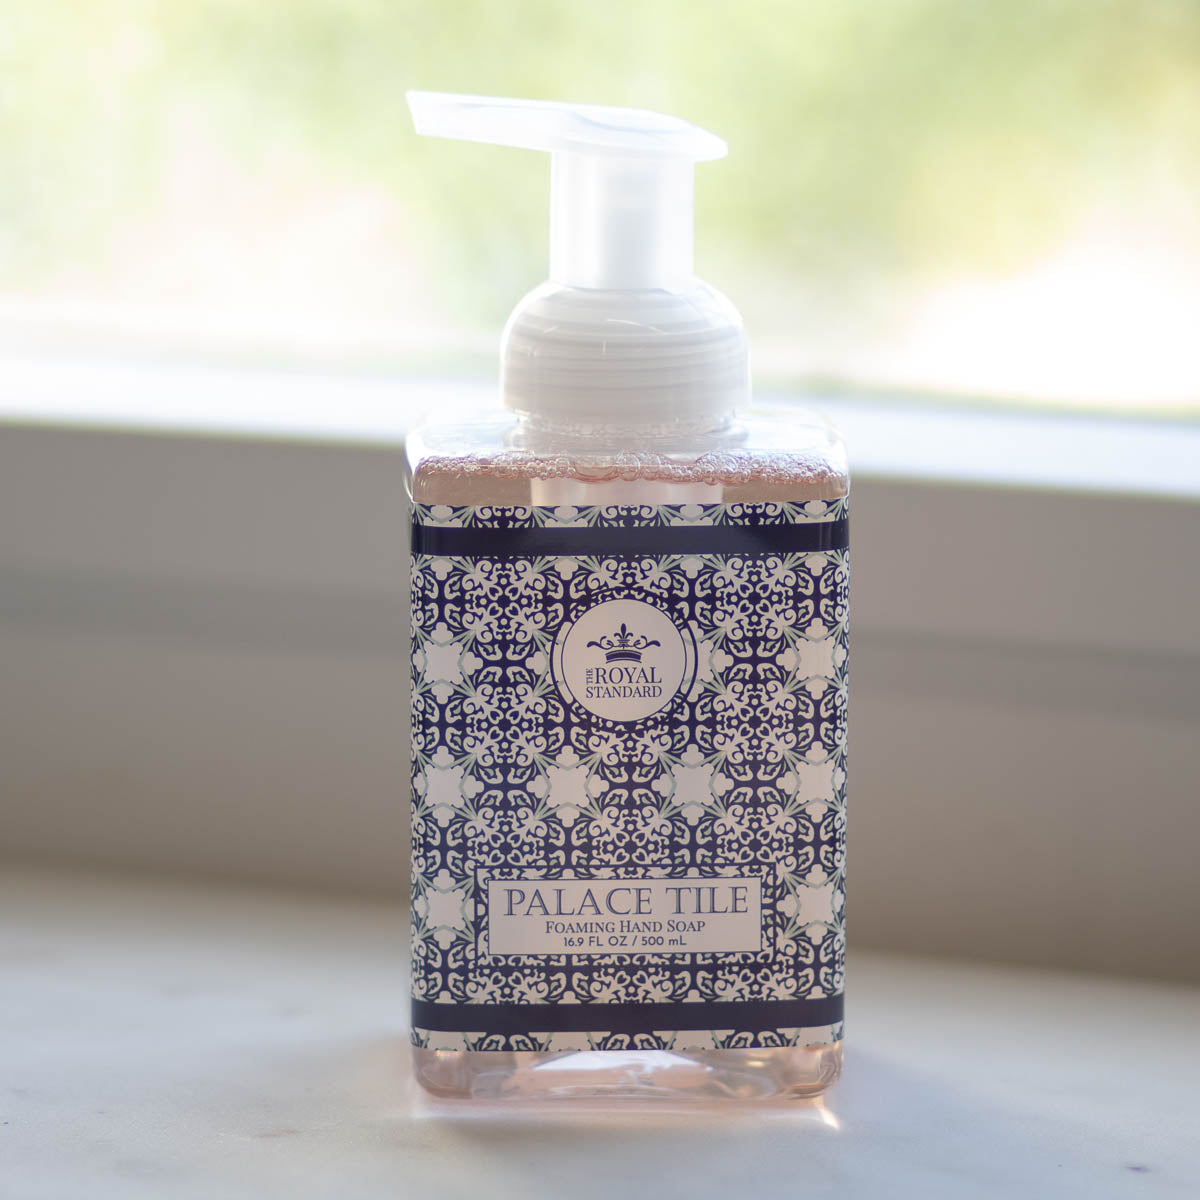 Palace Tile Foaming Hand Soap